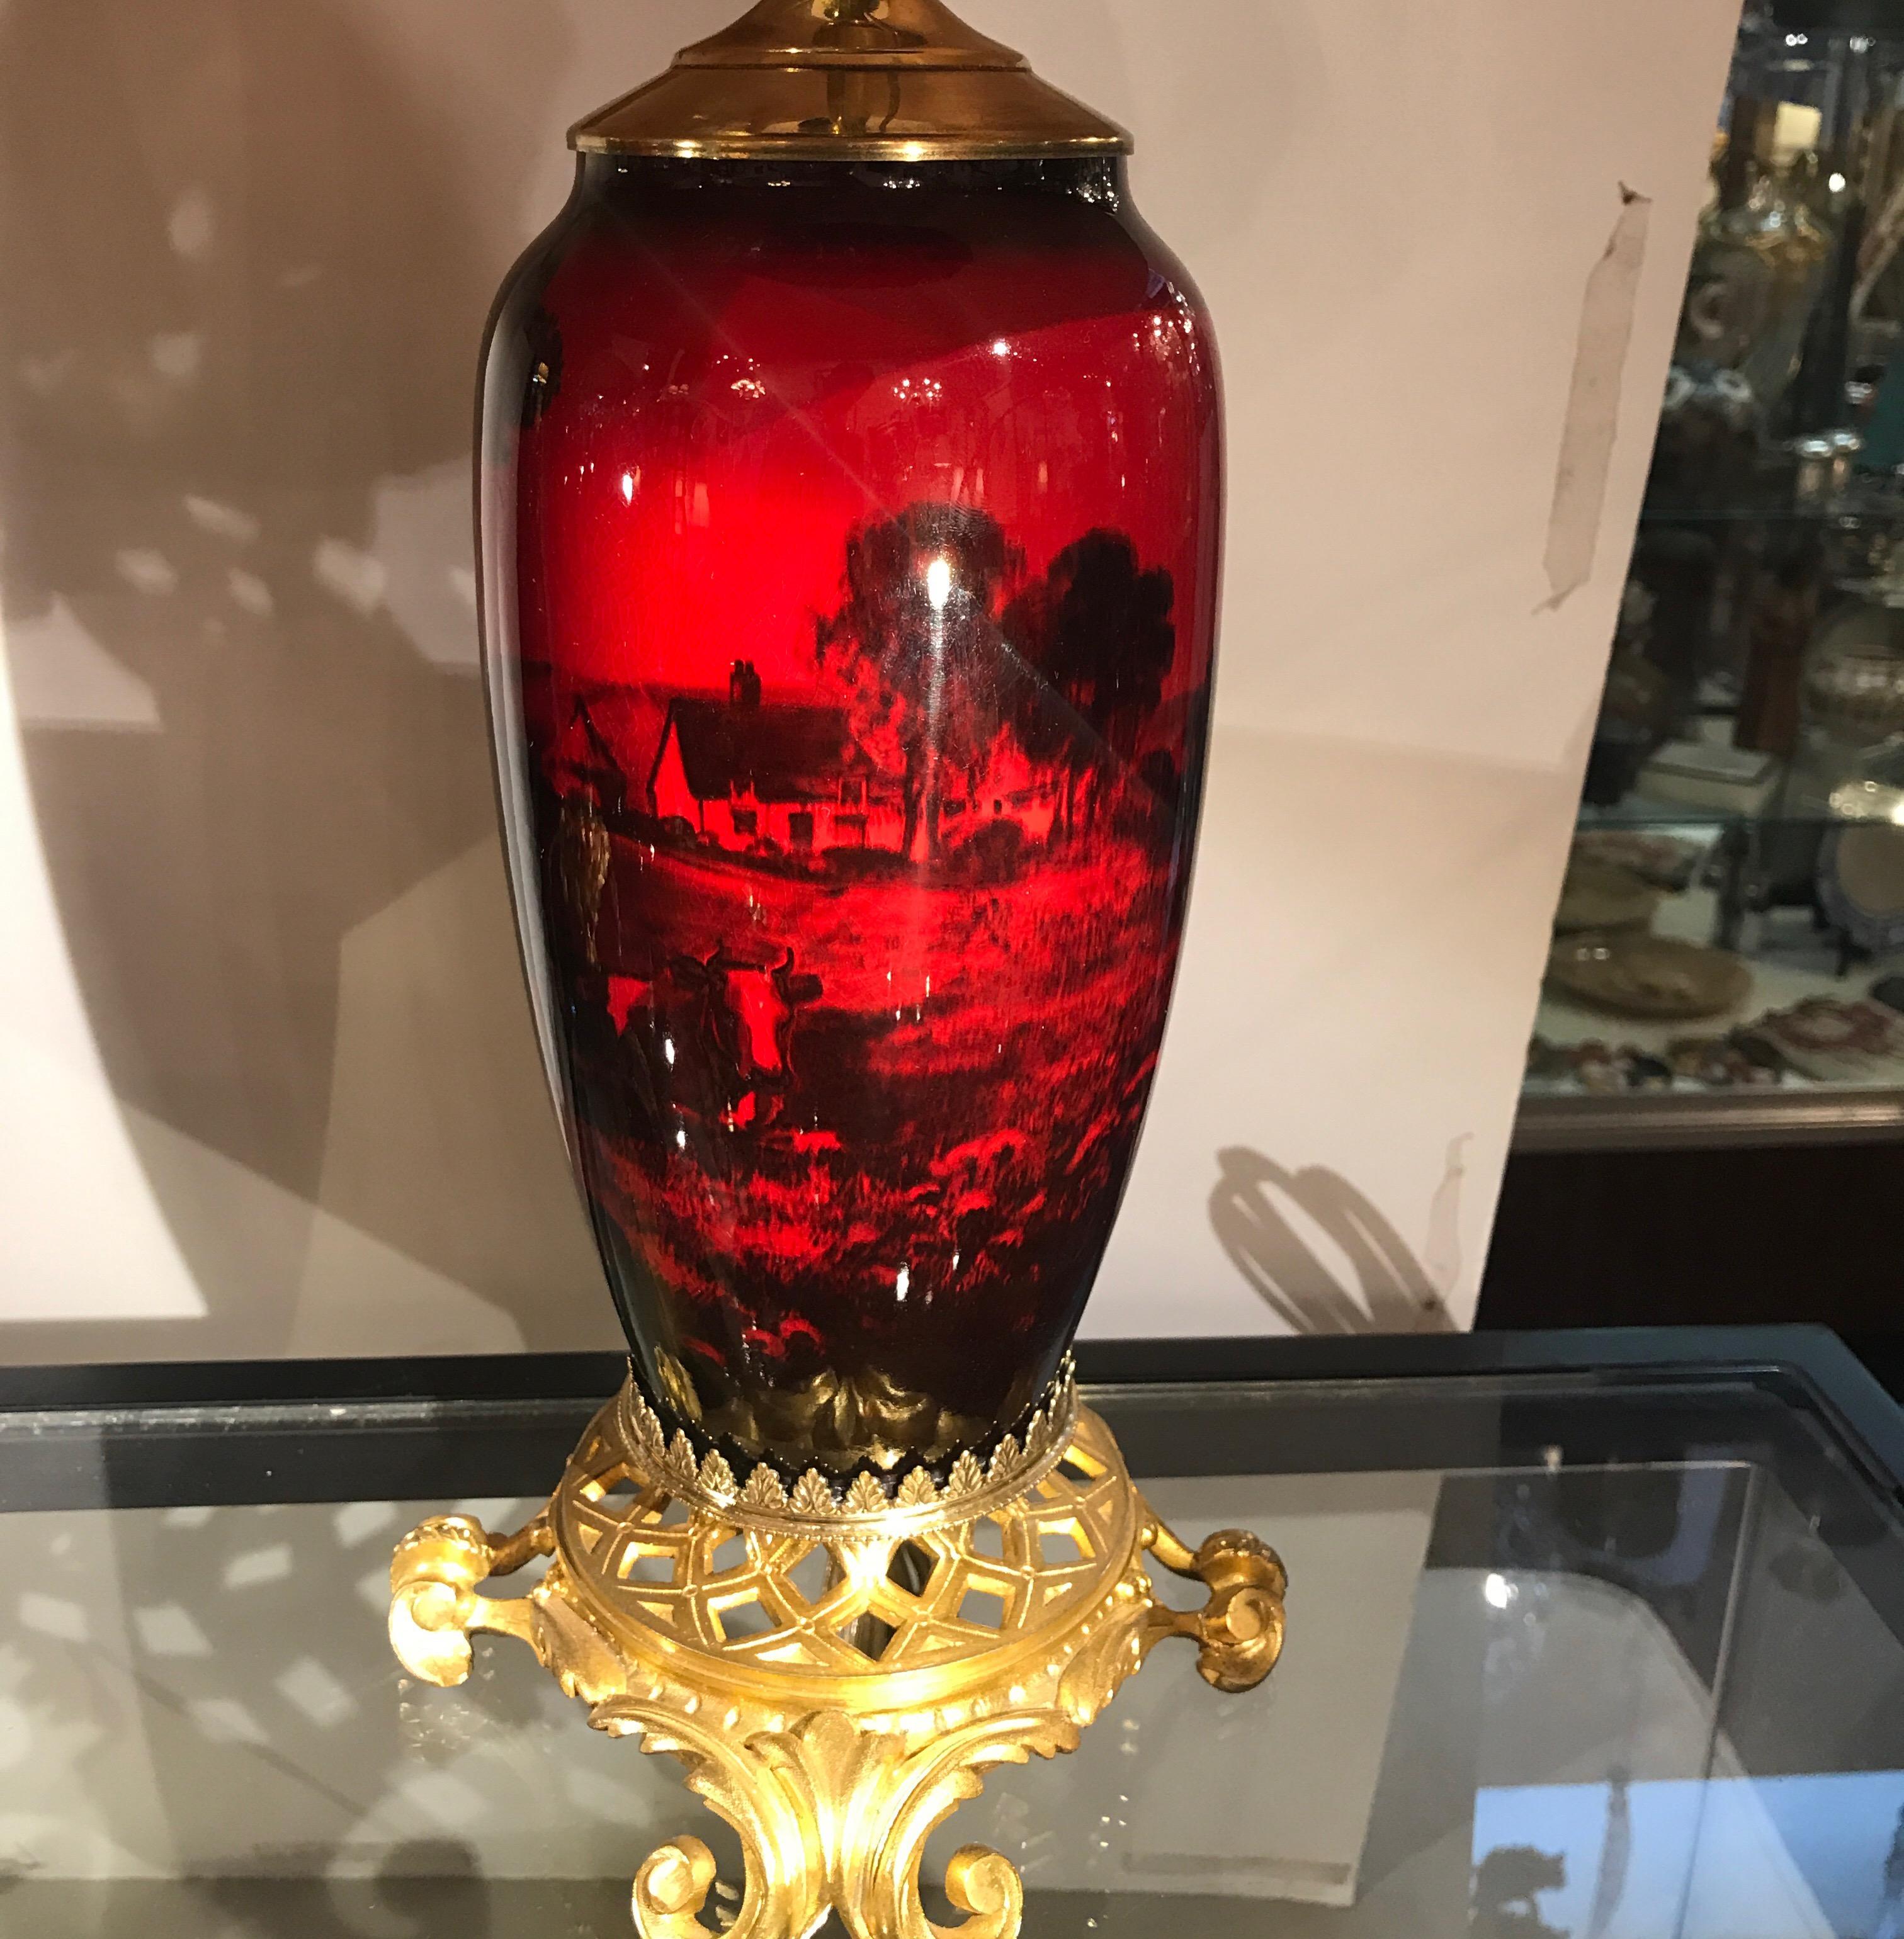 Exceptional pair of English flambe glazed ormolu-mounted lamps. Made by Royal Doulton in the early 20th century, these rich red glazed lamps are hand-painted by the top decorator, Charles Noke of the Royal Doulton porcelain and pottery makers. The